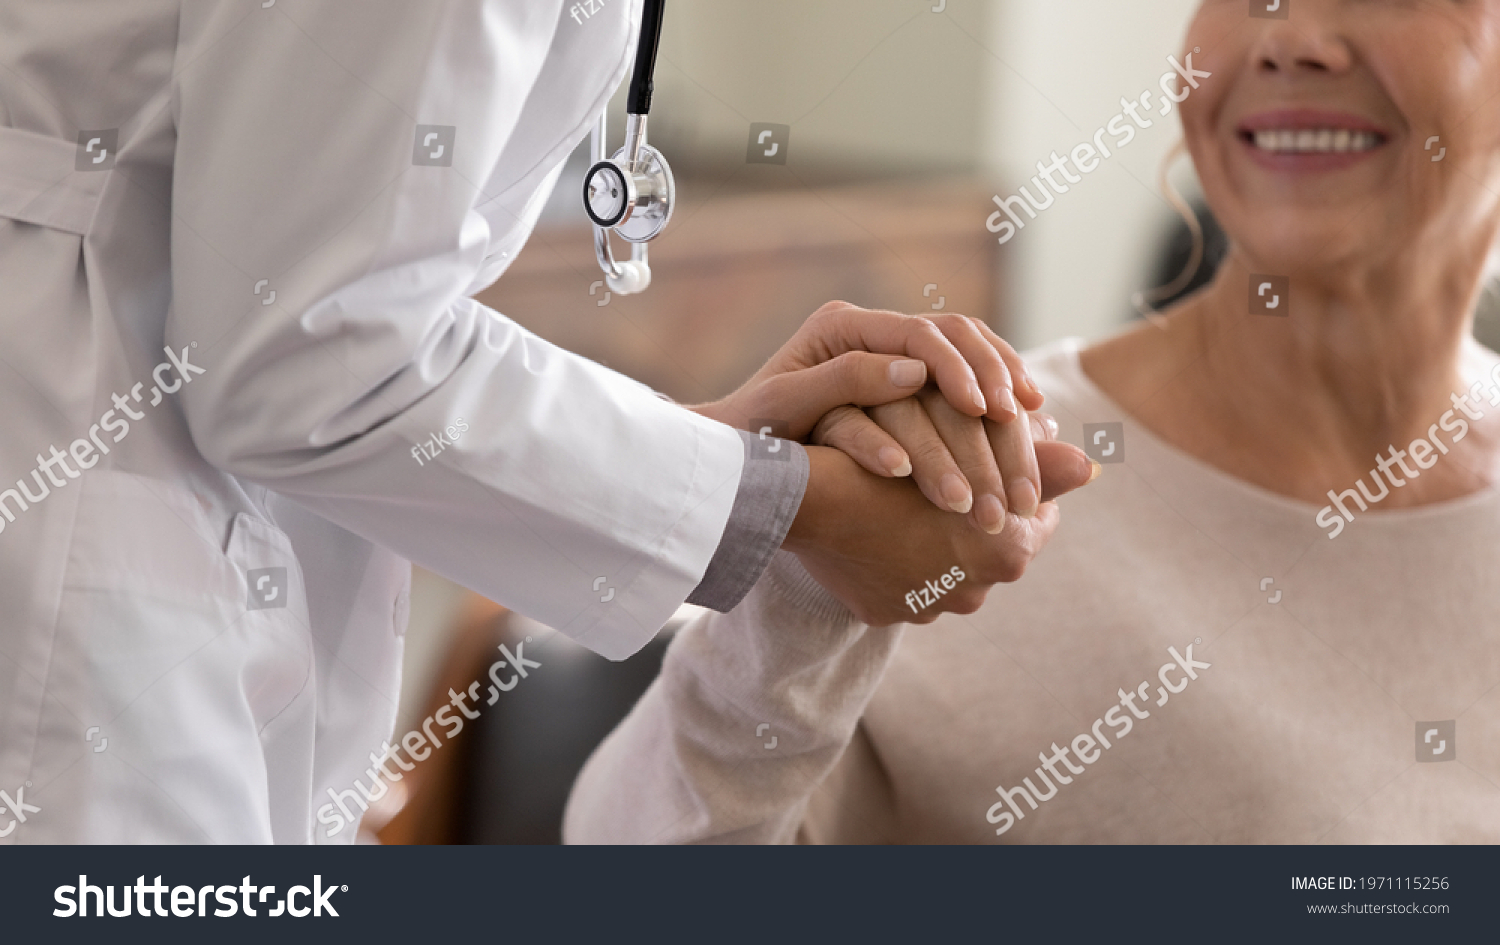 Doctor giving hope. Close up shot of young female physician leaning forward to smiling elderly lady patient holding her hand in palms. Woman caretaker in white coat supporting encouraging old person #1971115256